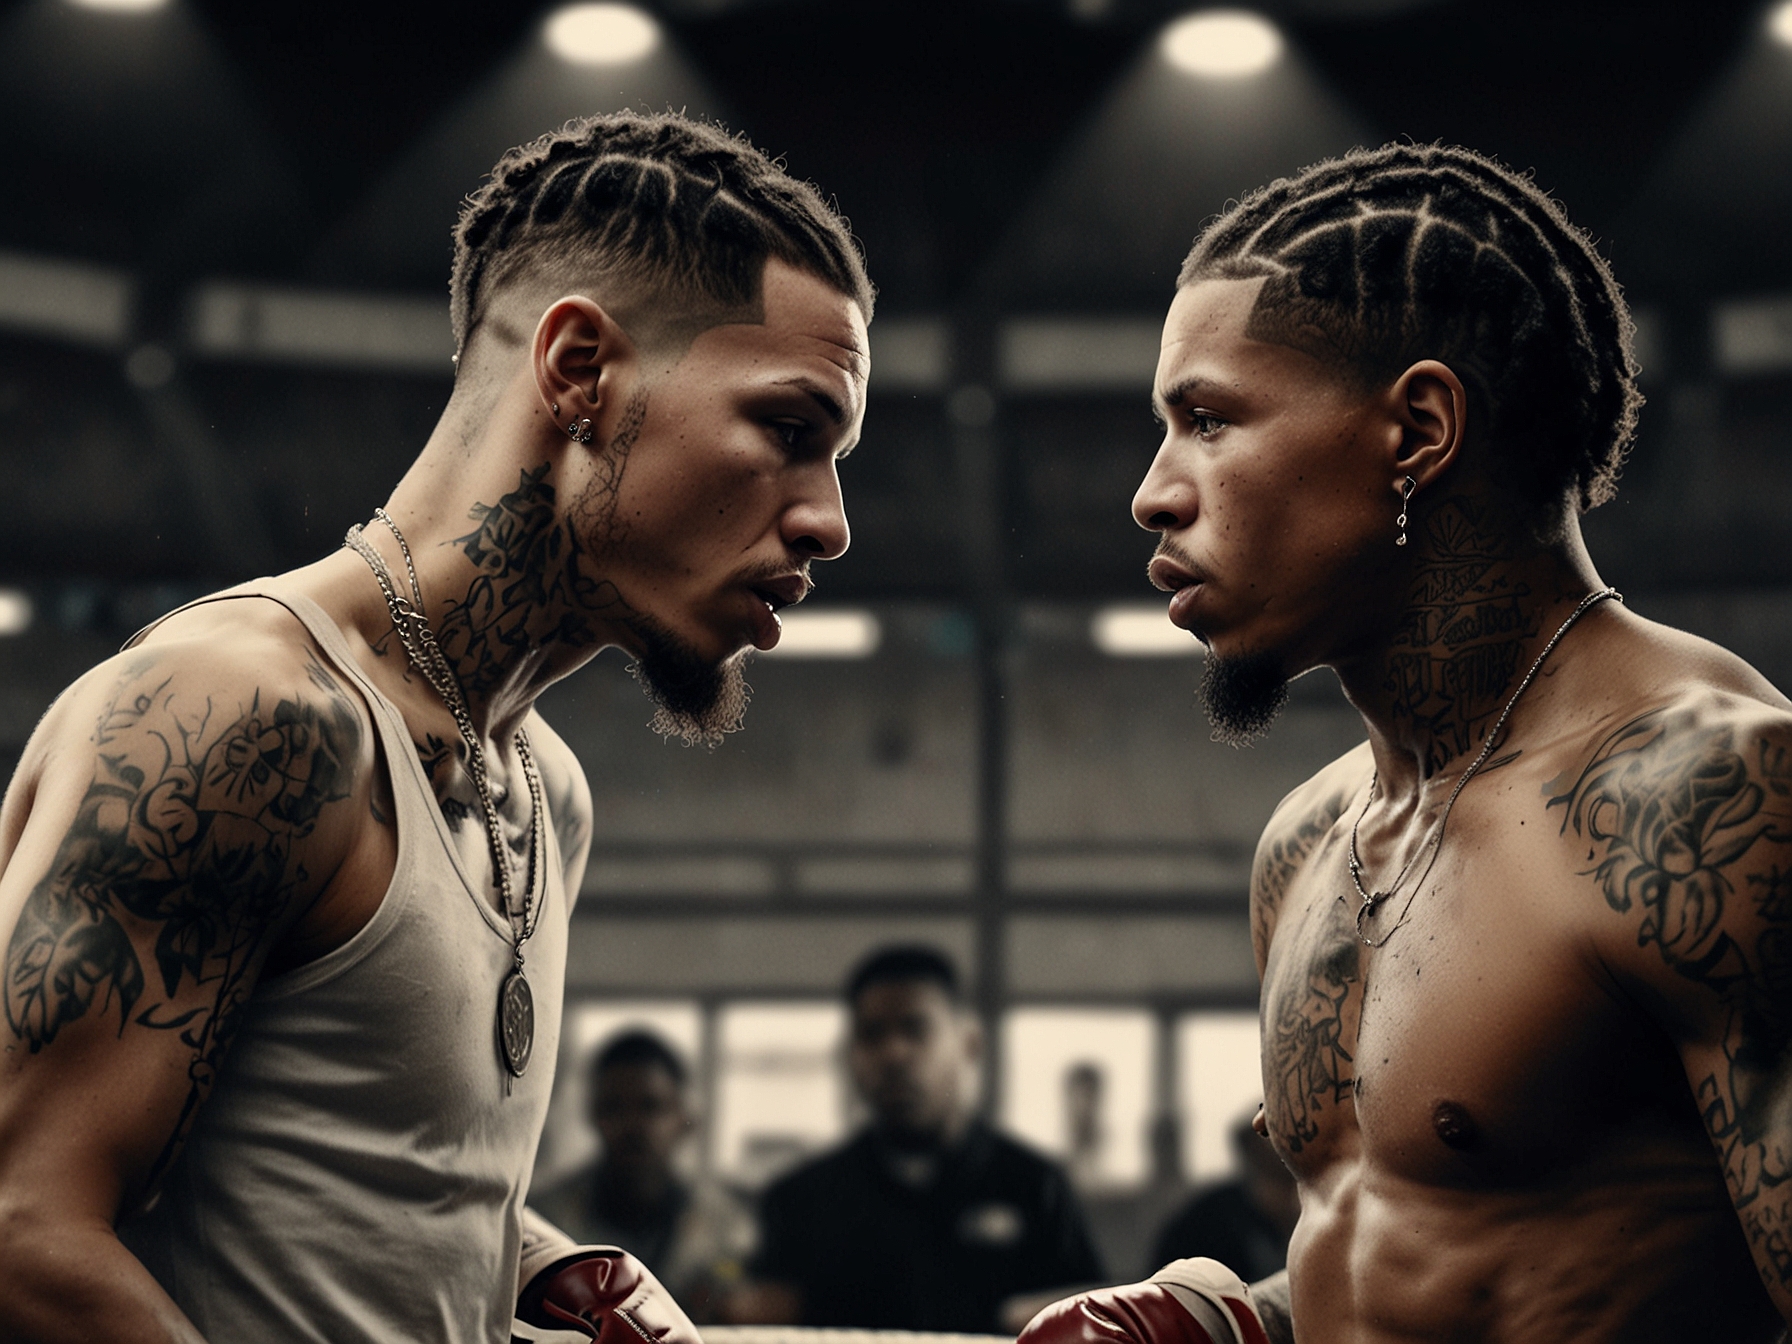 An intense face-off between Sean O'Malley and Gervonta Davis, highlighting the tension and excitement of their potential match-up. O'Malley exudes confidence while Davis remains poised.